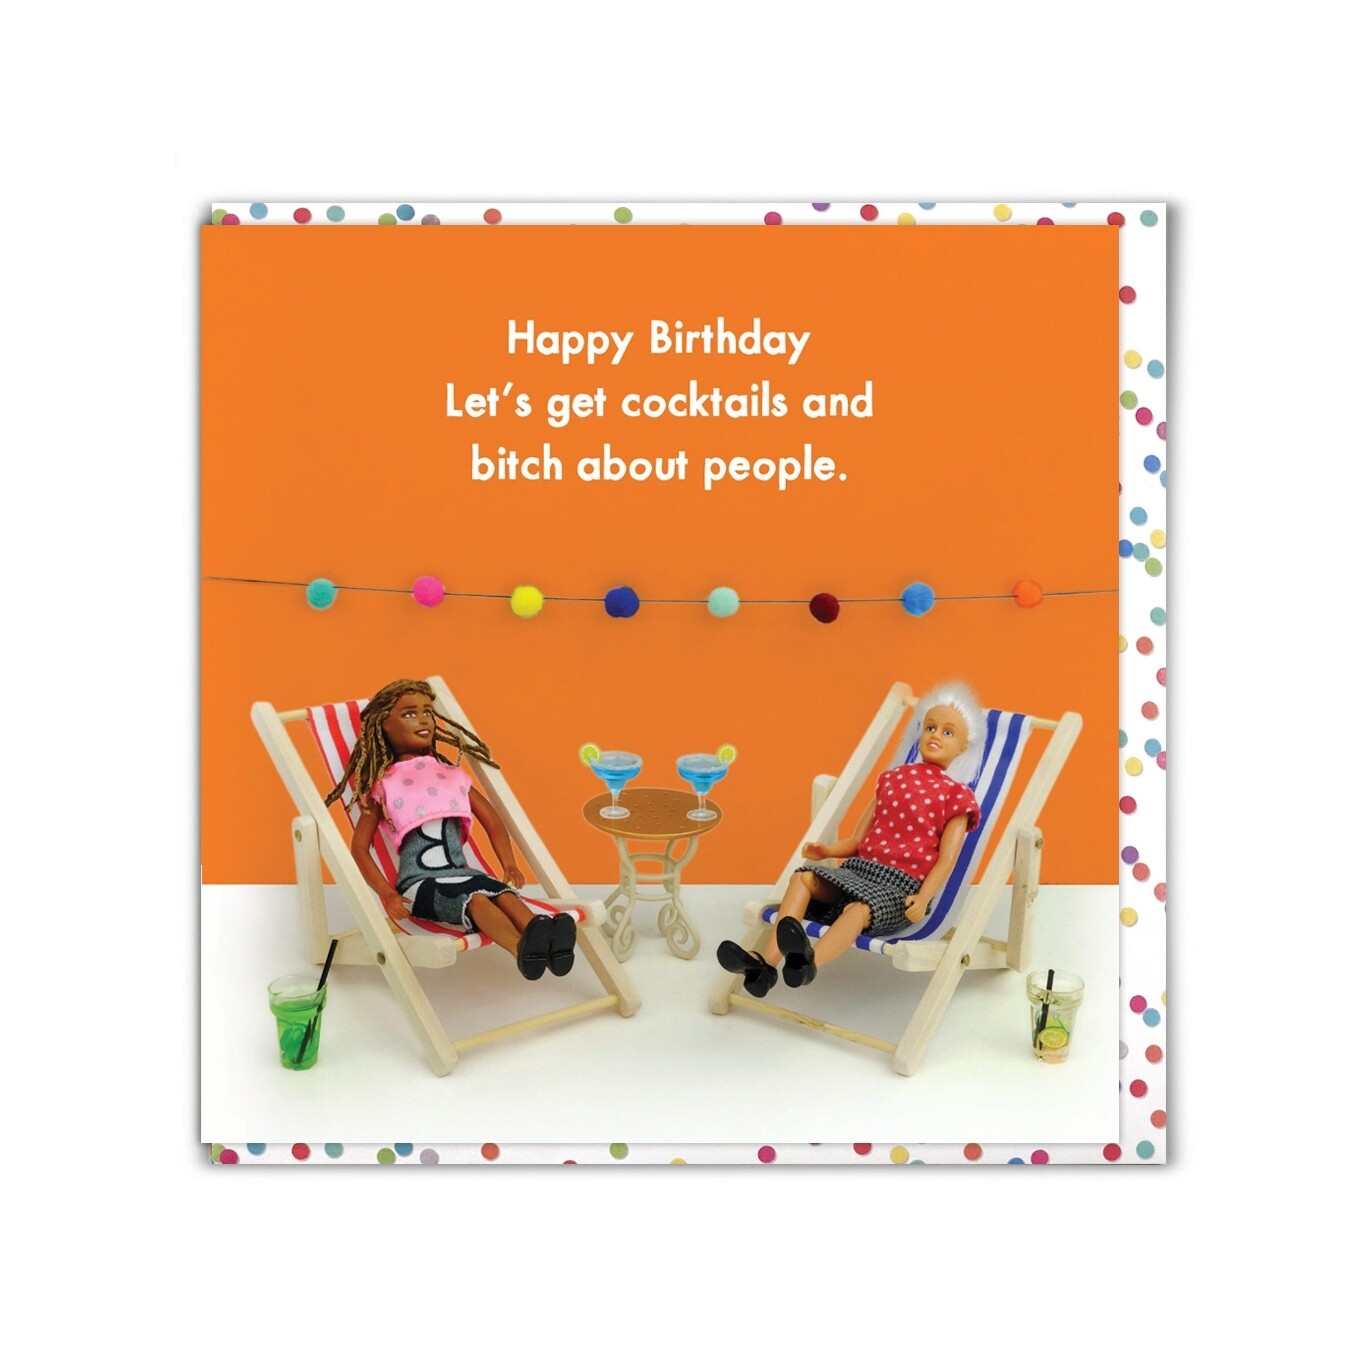 Bitch about People Birthday Card